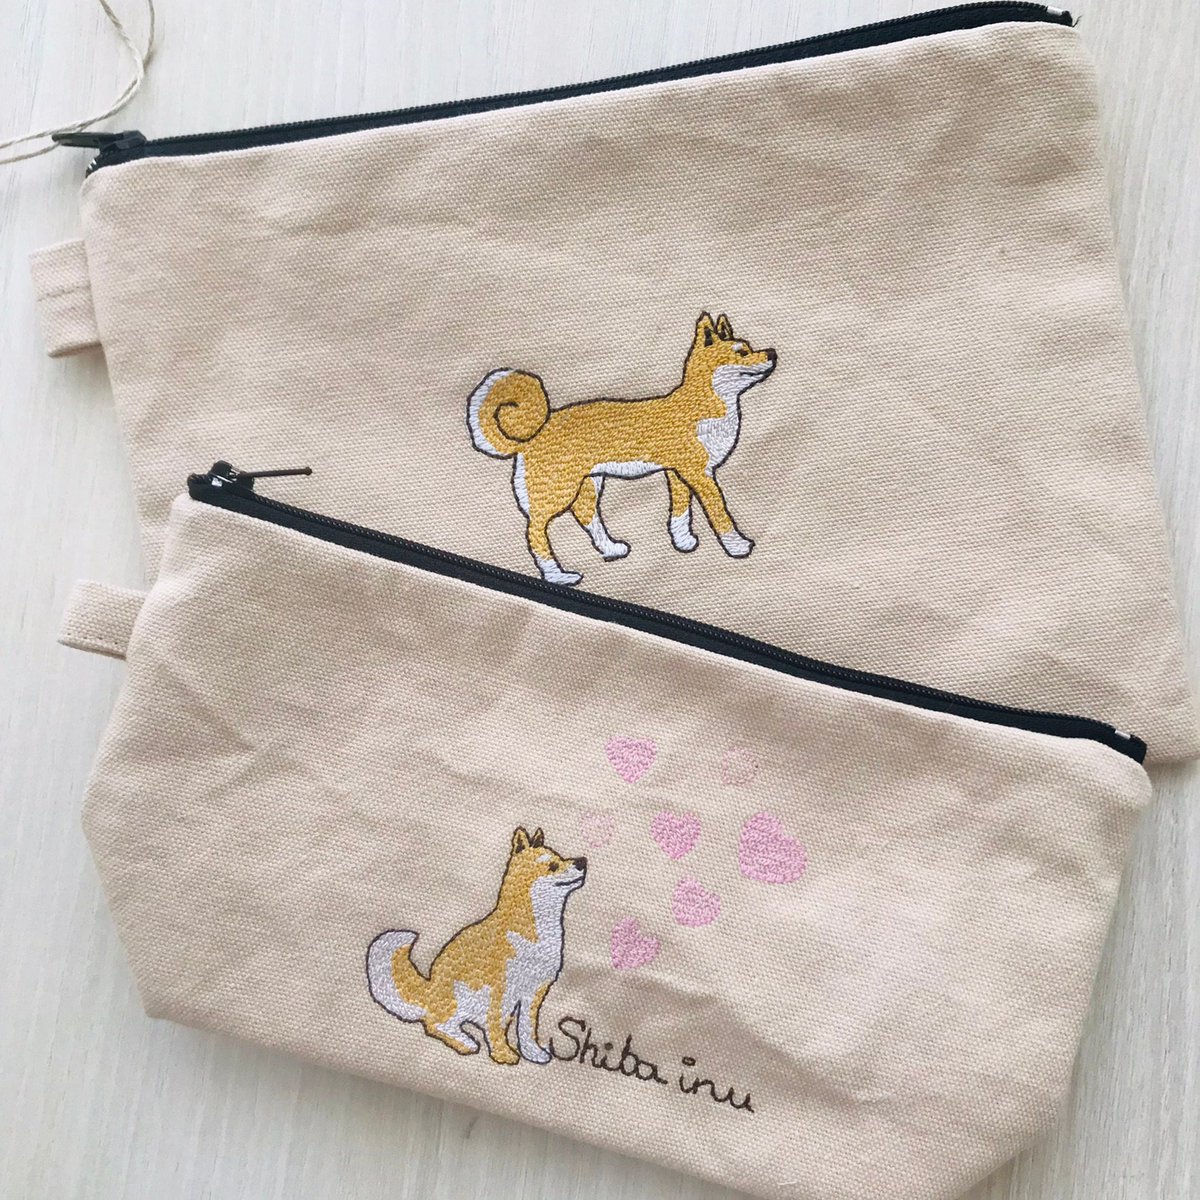 Excited to share the latest addition to my #etsyshop: Zipper Pouch Shiba inu etsy.me/3vA9pUV #beige #bohohippie #madeinfrance #zipperedpouch #pursepouch #smallpouch #makeuppouch #travelpouch #travelcosmeticbag #etsybranding #shibamania #shibainu #柴犬